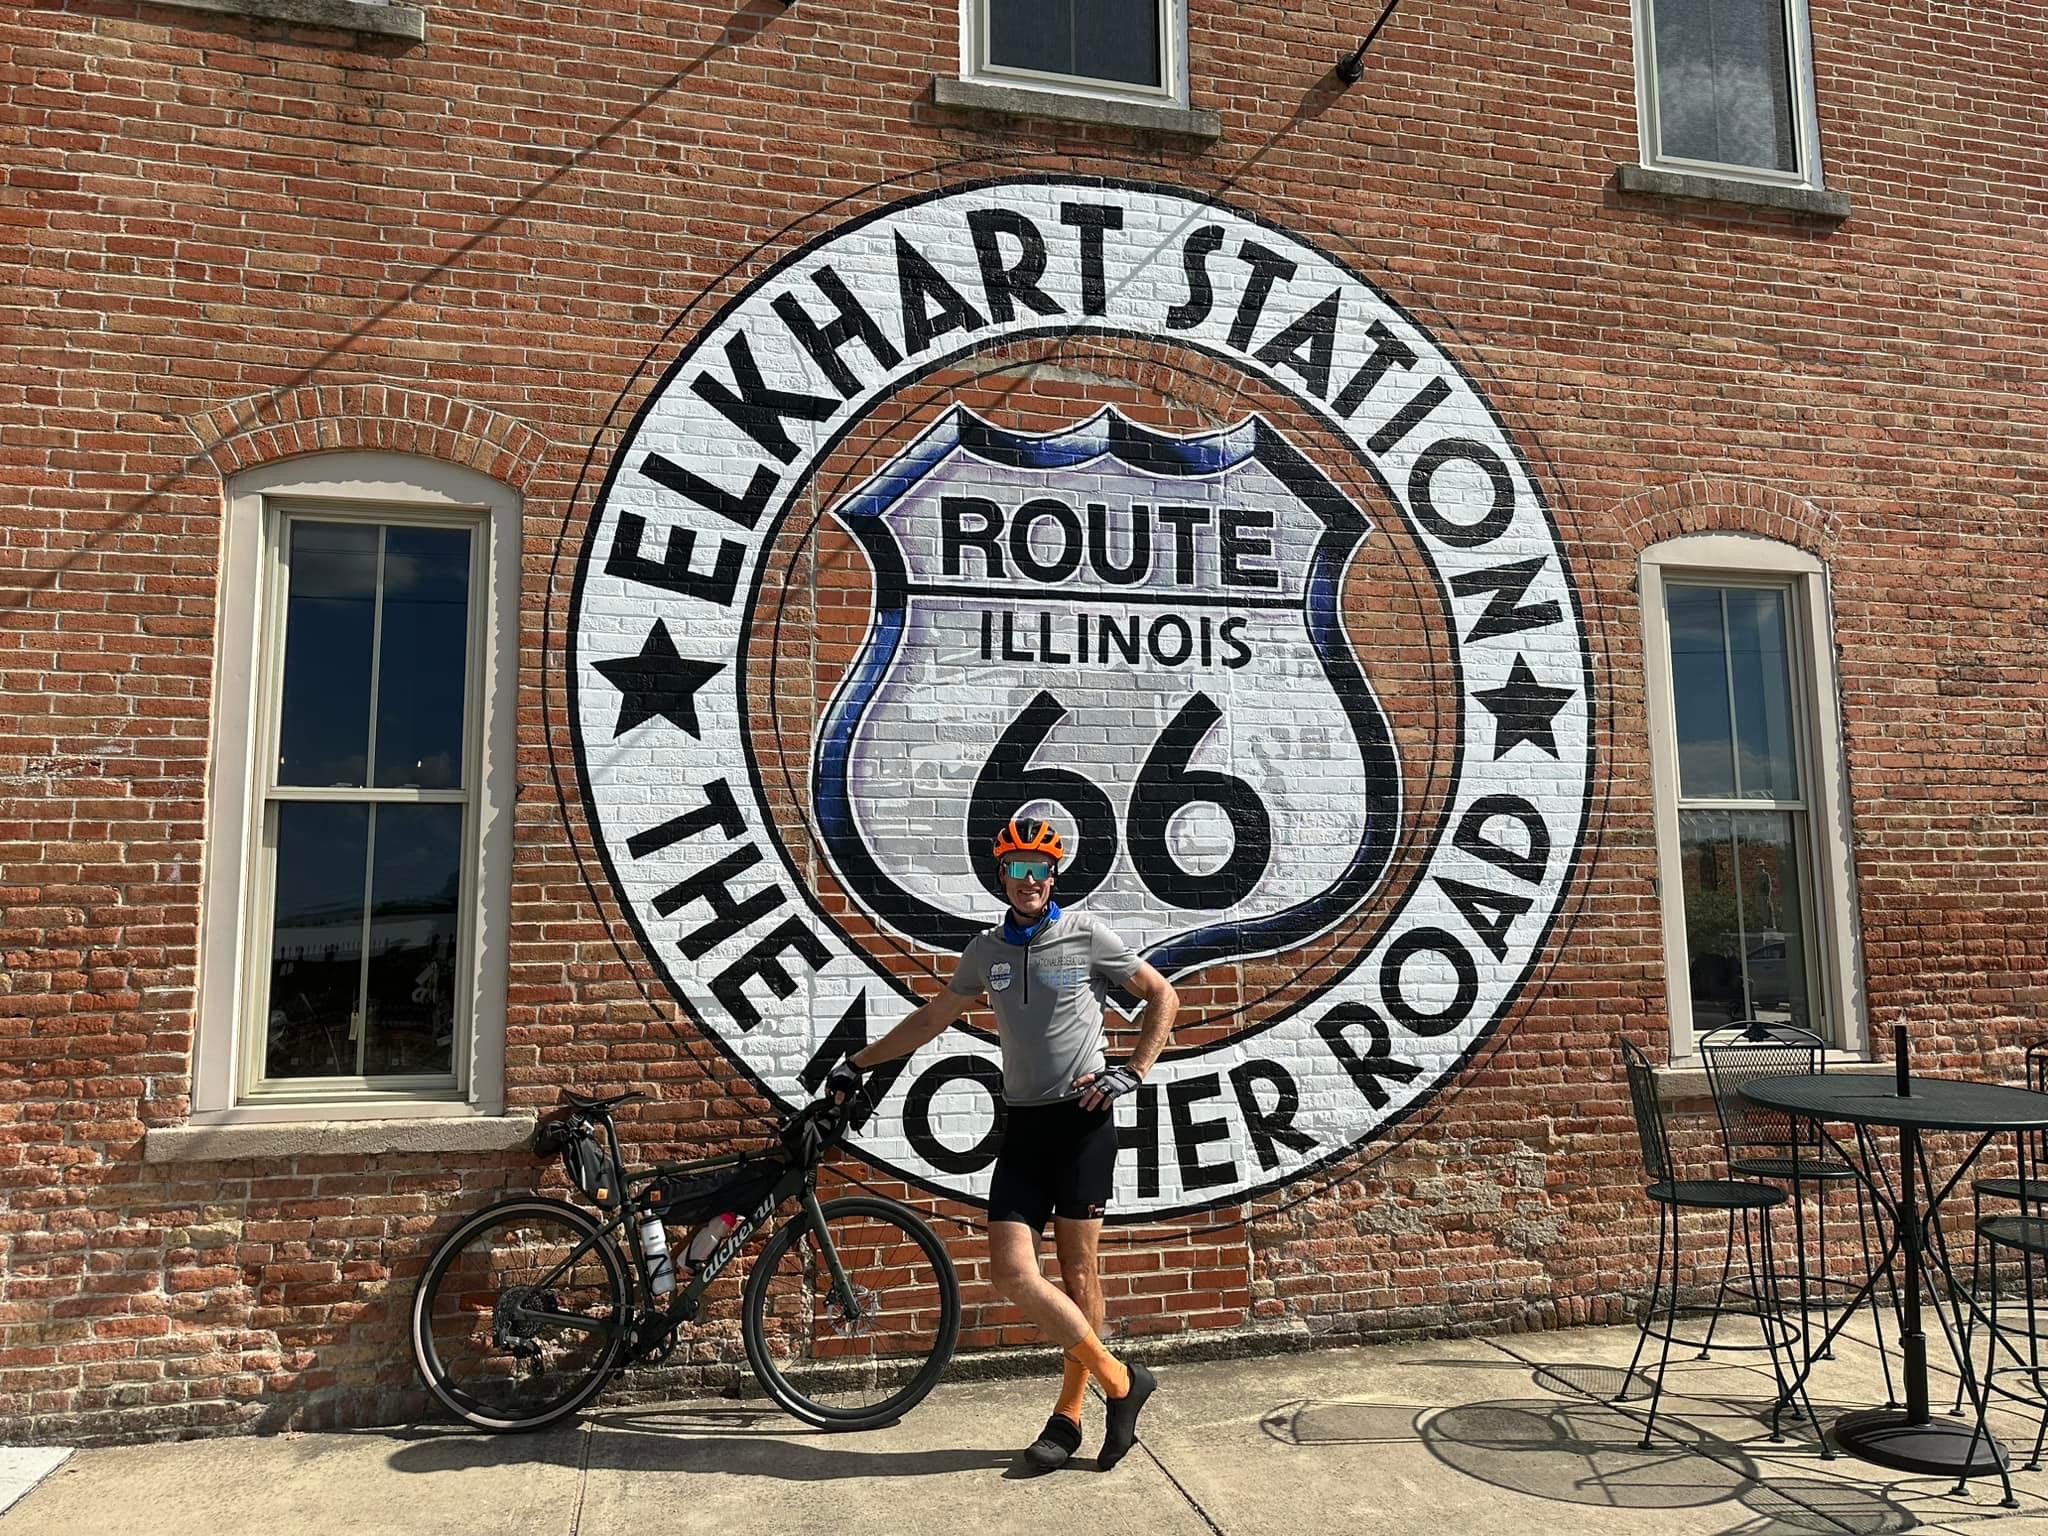 Dan stands with bike in front of a brick building displaying a large Route 66 sign in Illinois